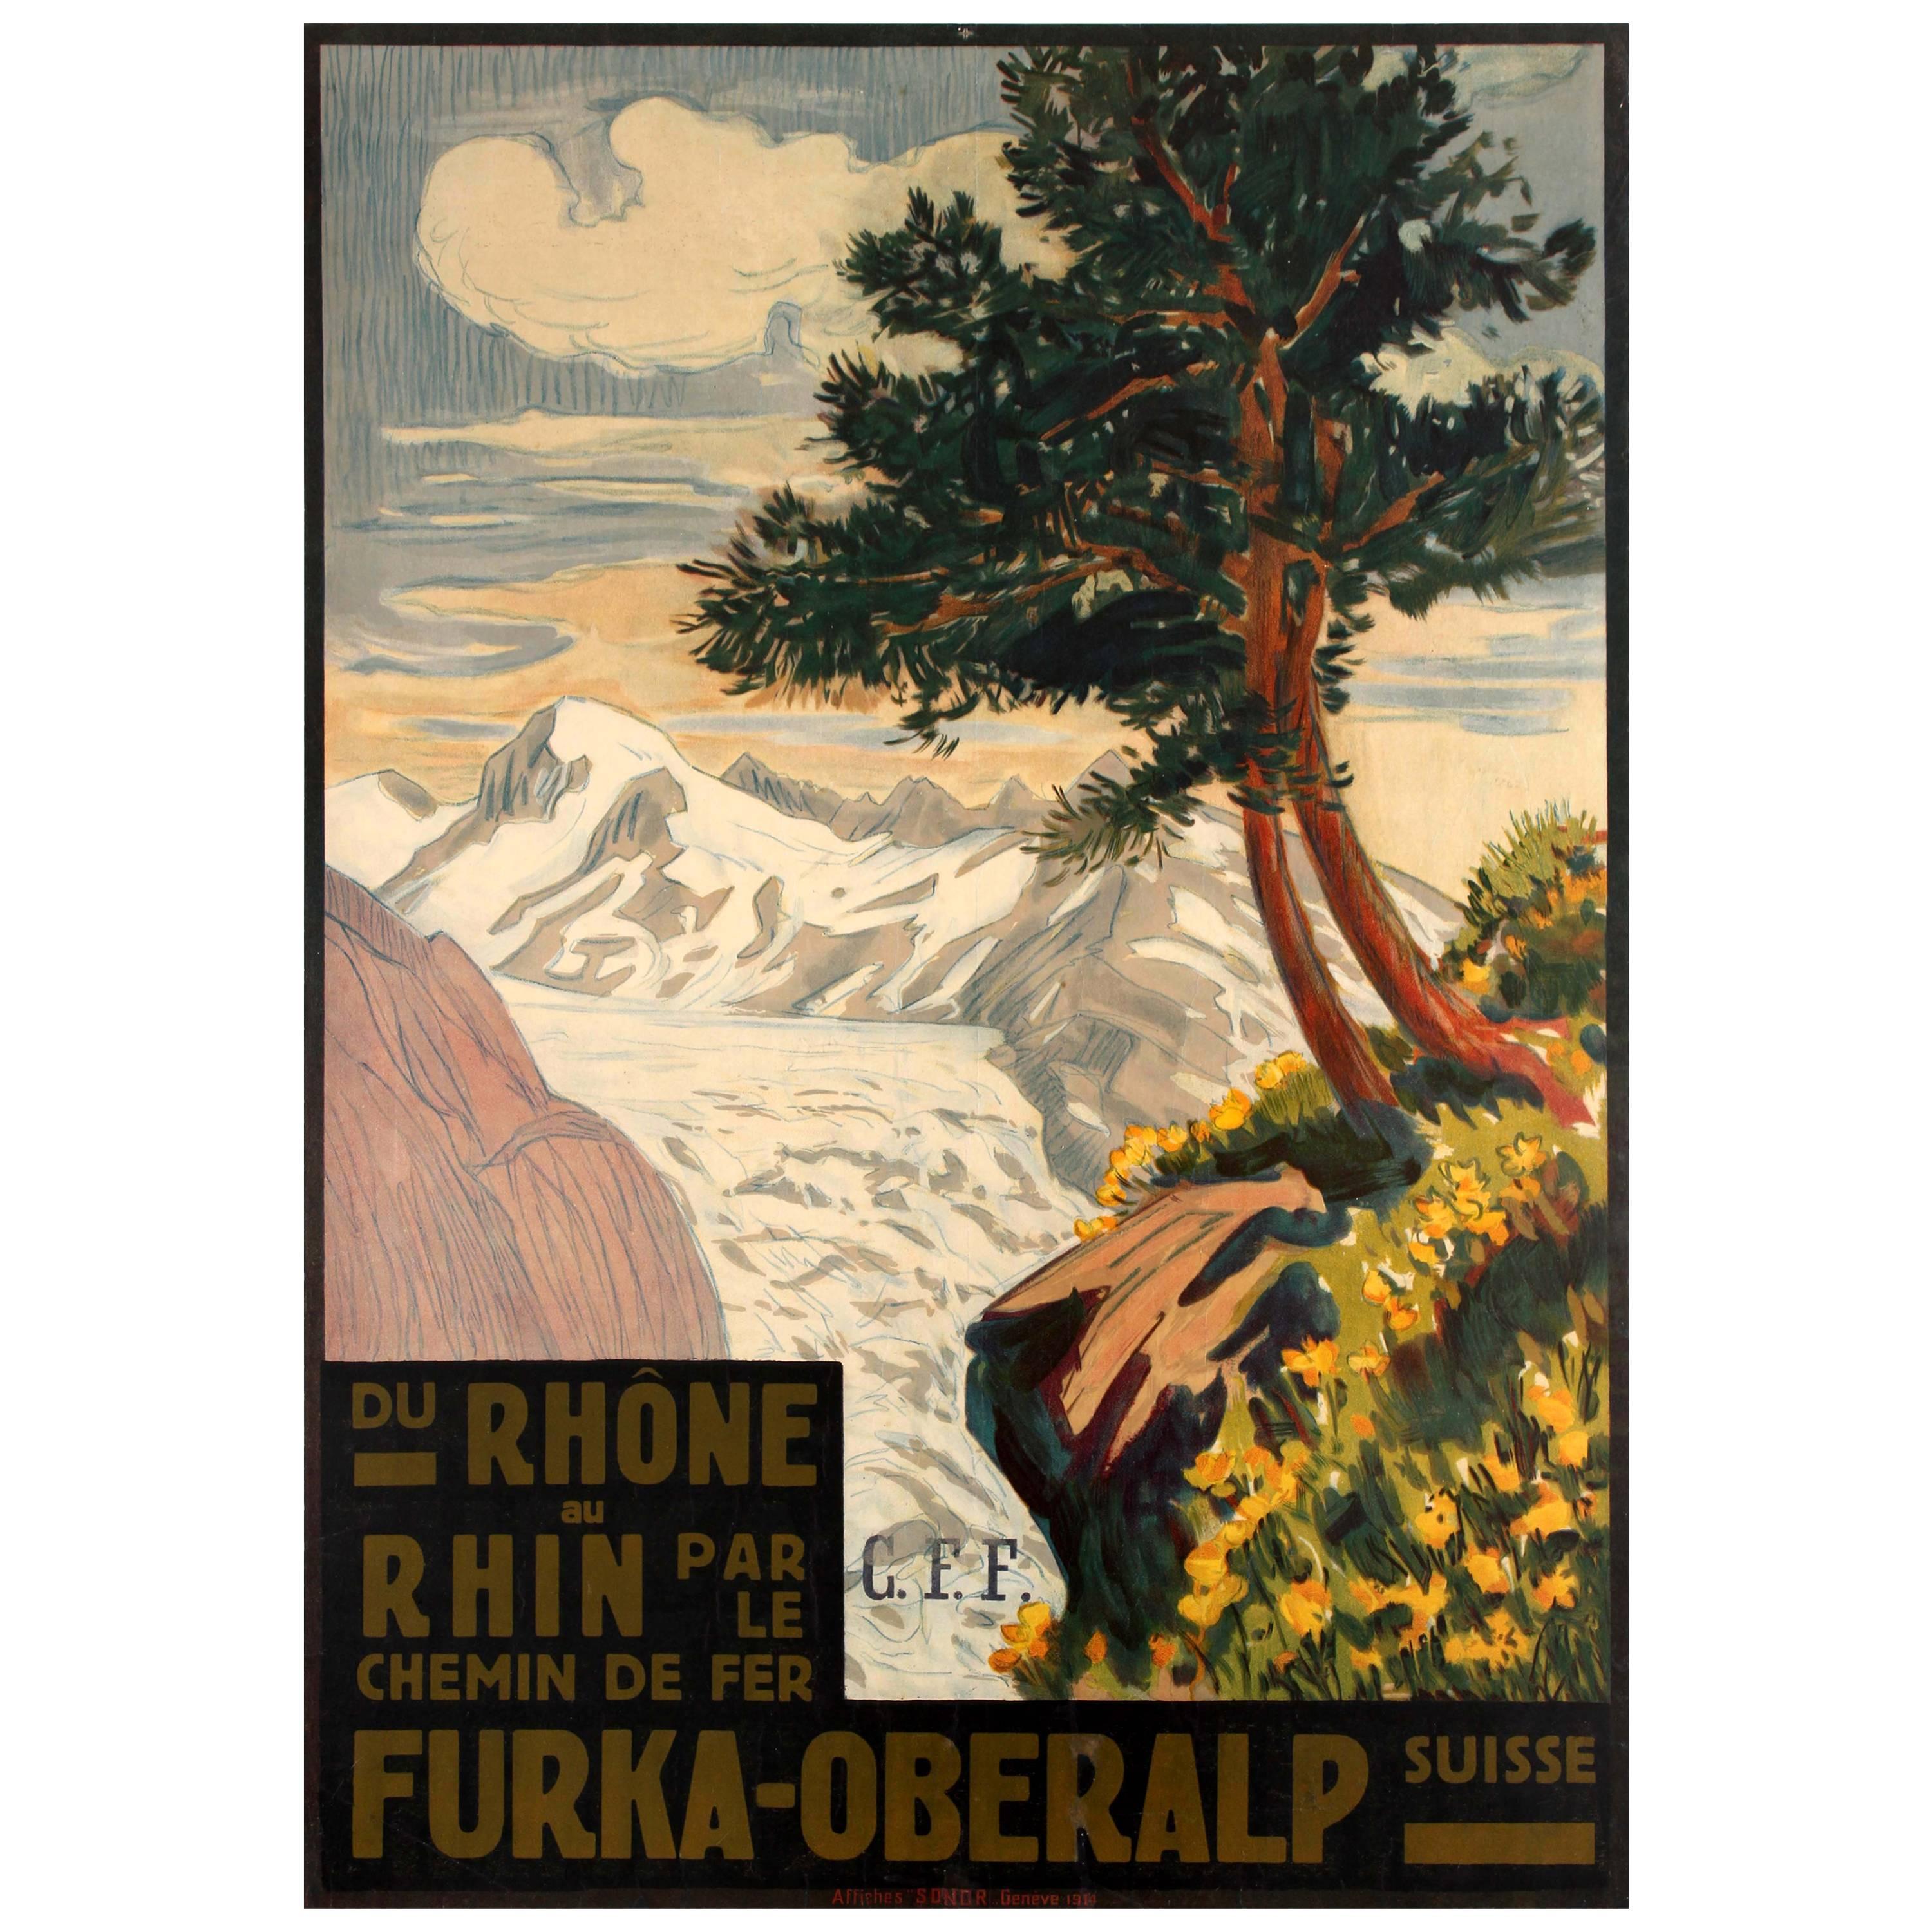 Original Antique Furka Oberalp Railway Poster - From The Rhone To Rhine By Train